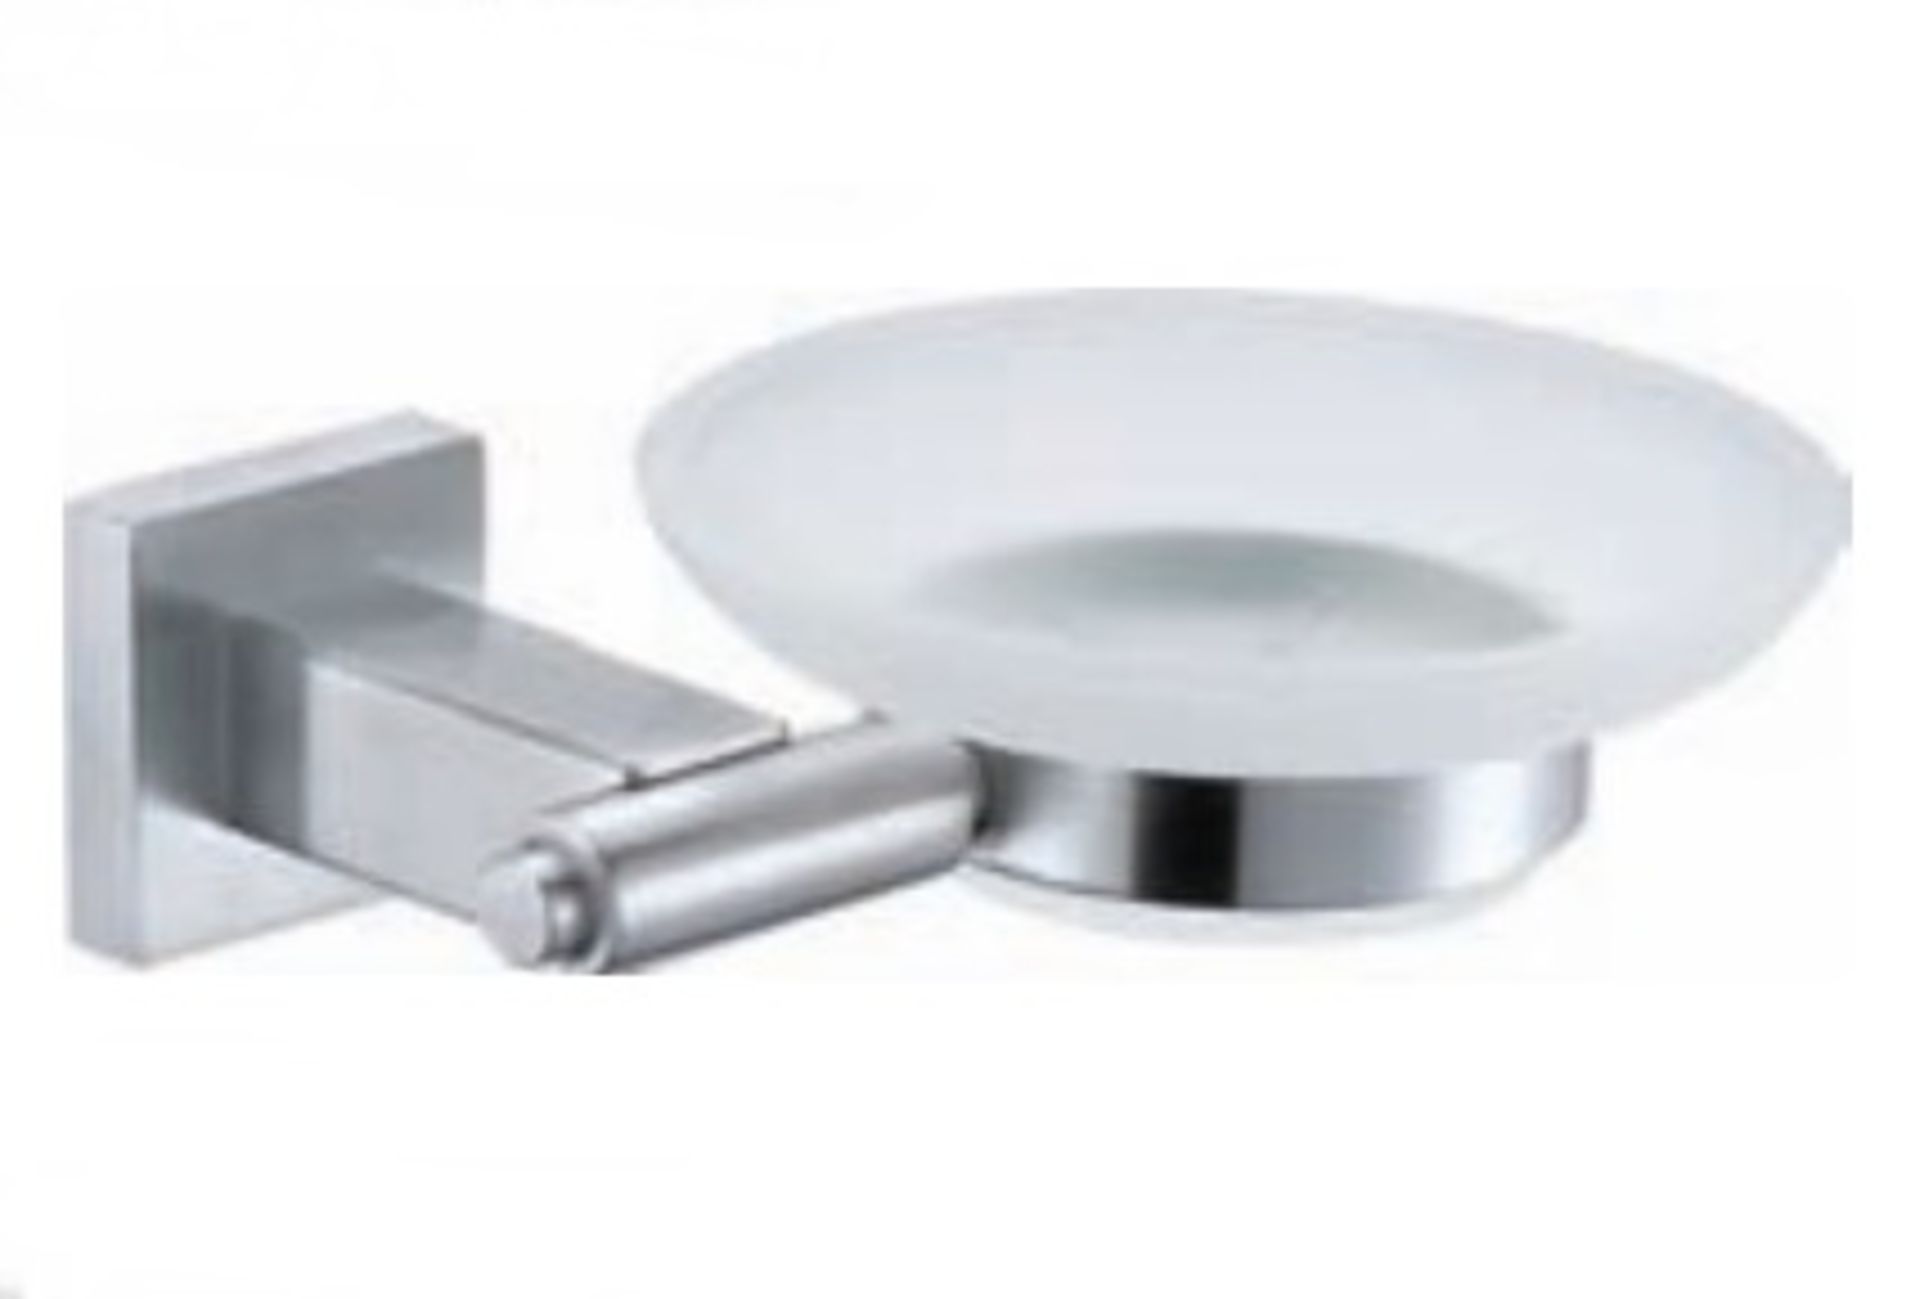 1 x Stonearth Soap Dish Holder With Frosted Glass - Solid Stainless Steel Bathroom Accessory - New